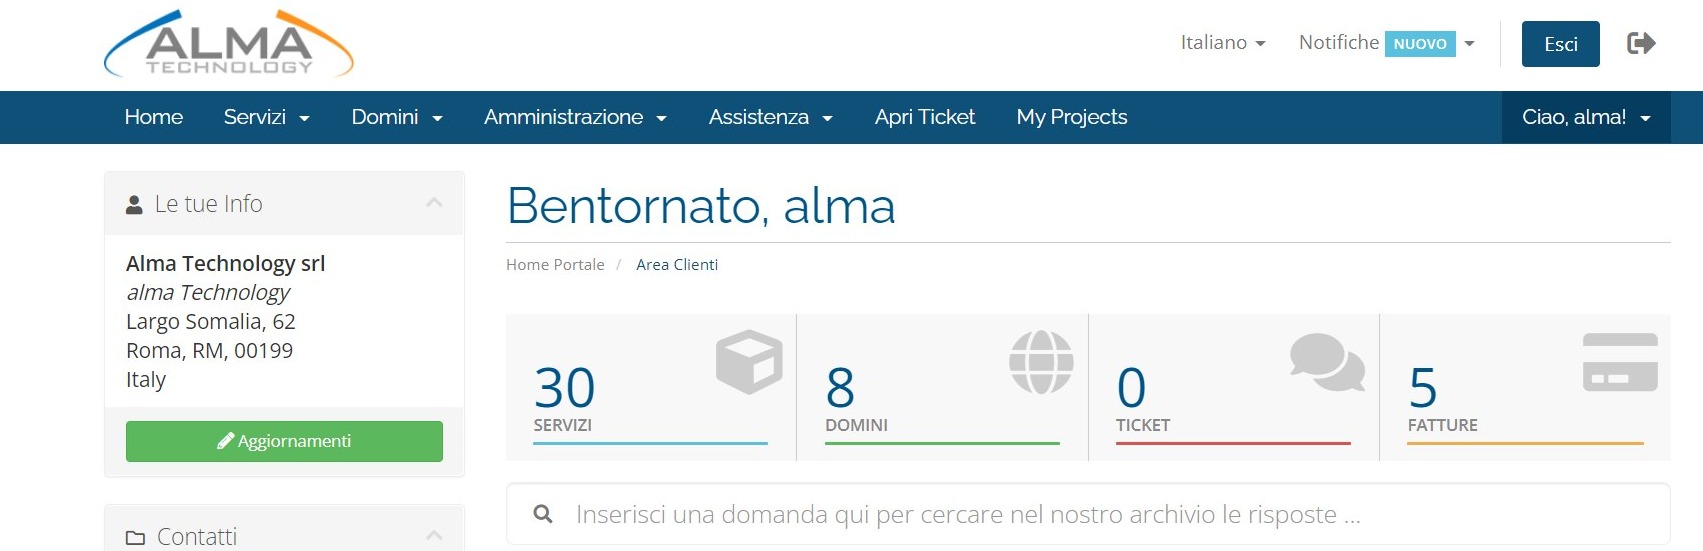 accesso hosting alma technology